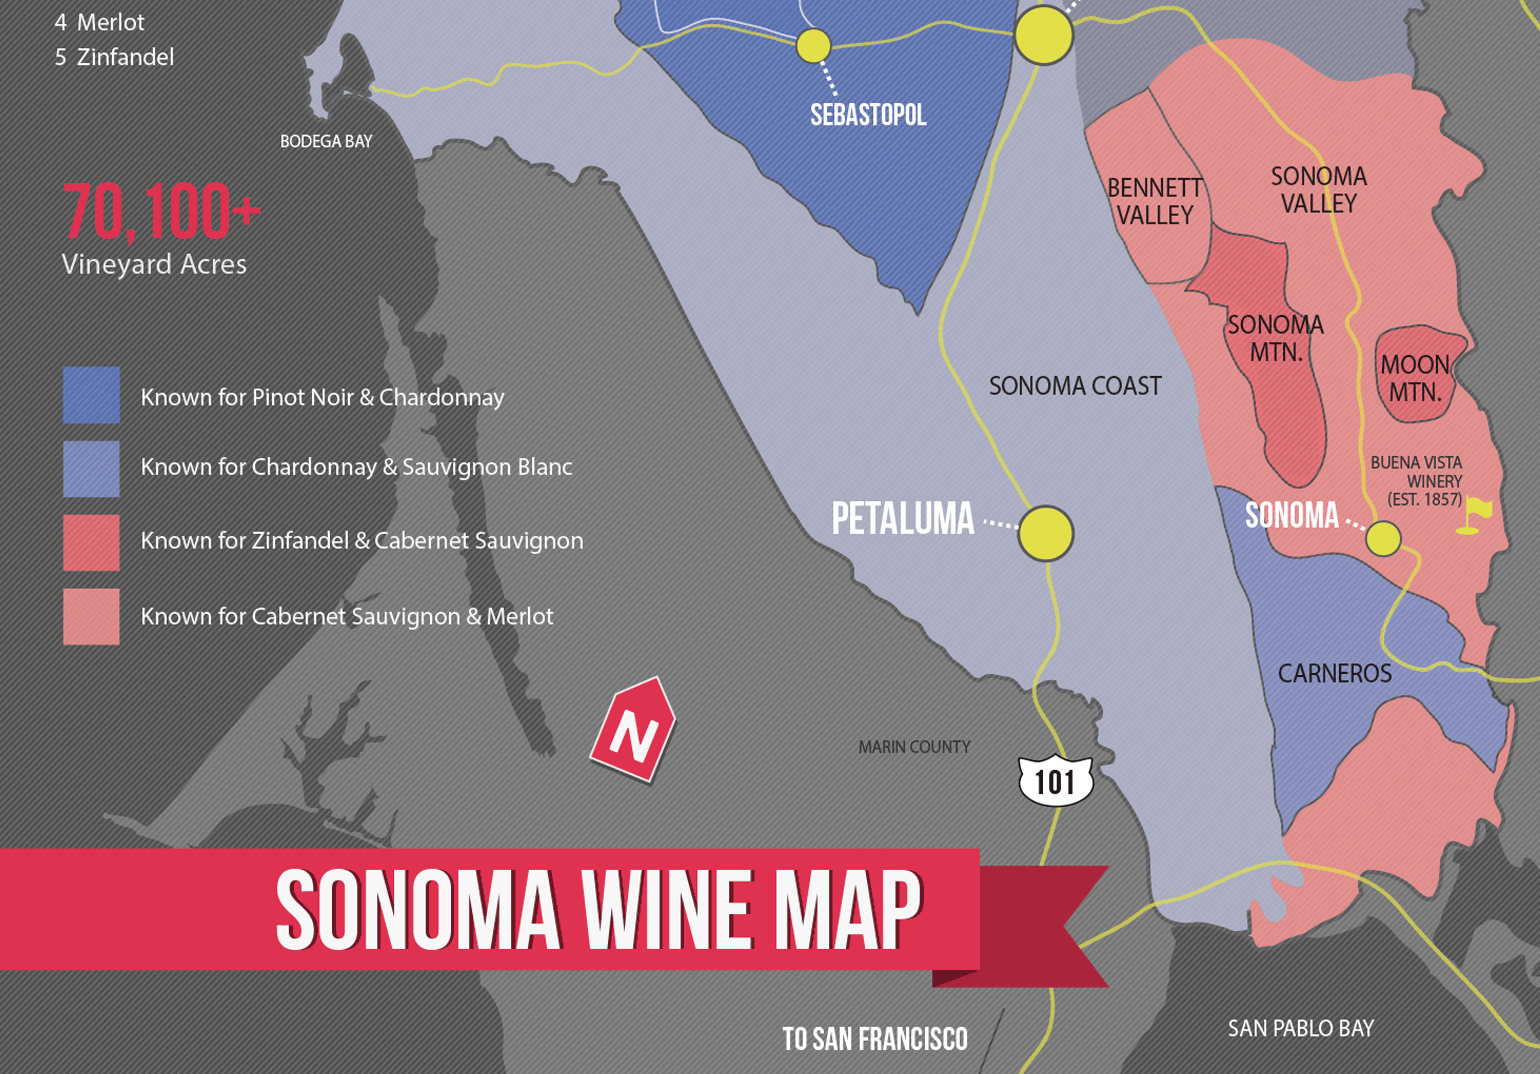 Cover Image for Understanding the Sonoma Wine Region (with Maps)